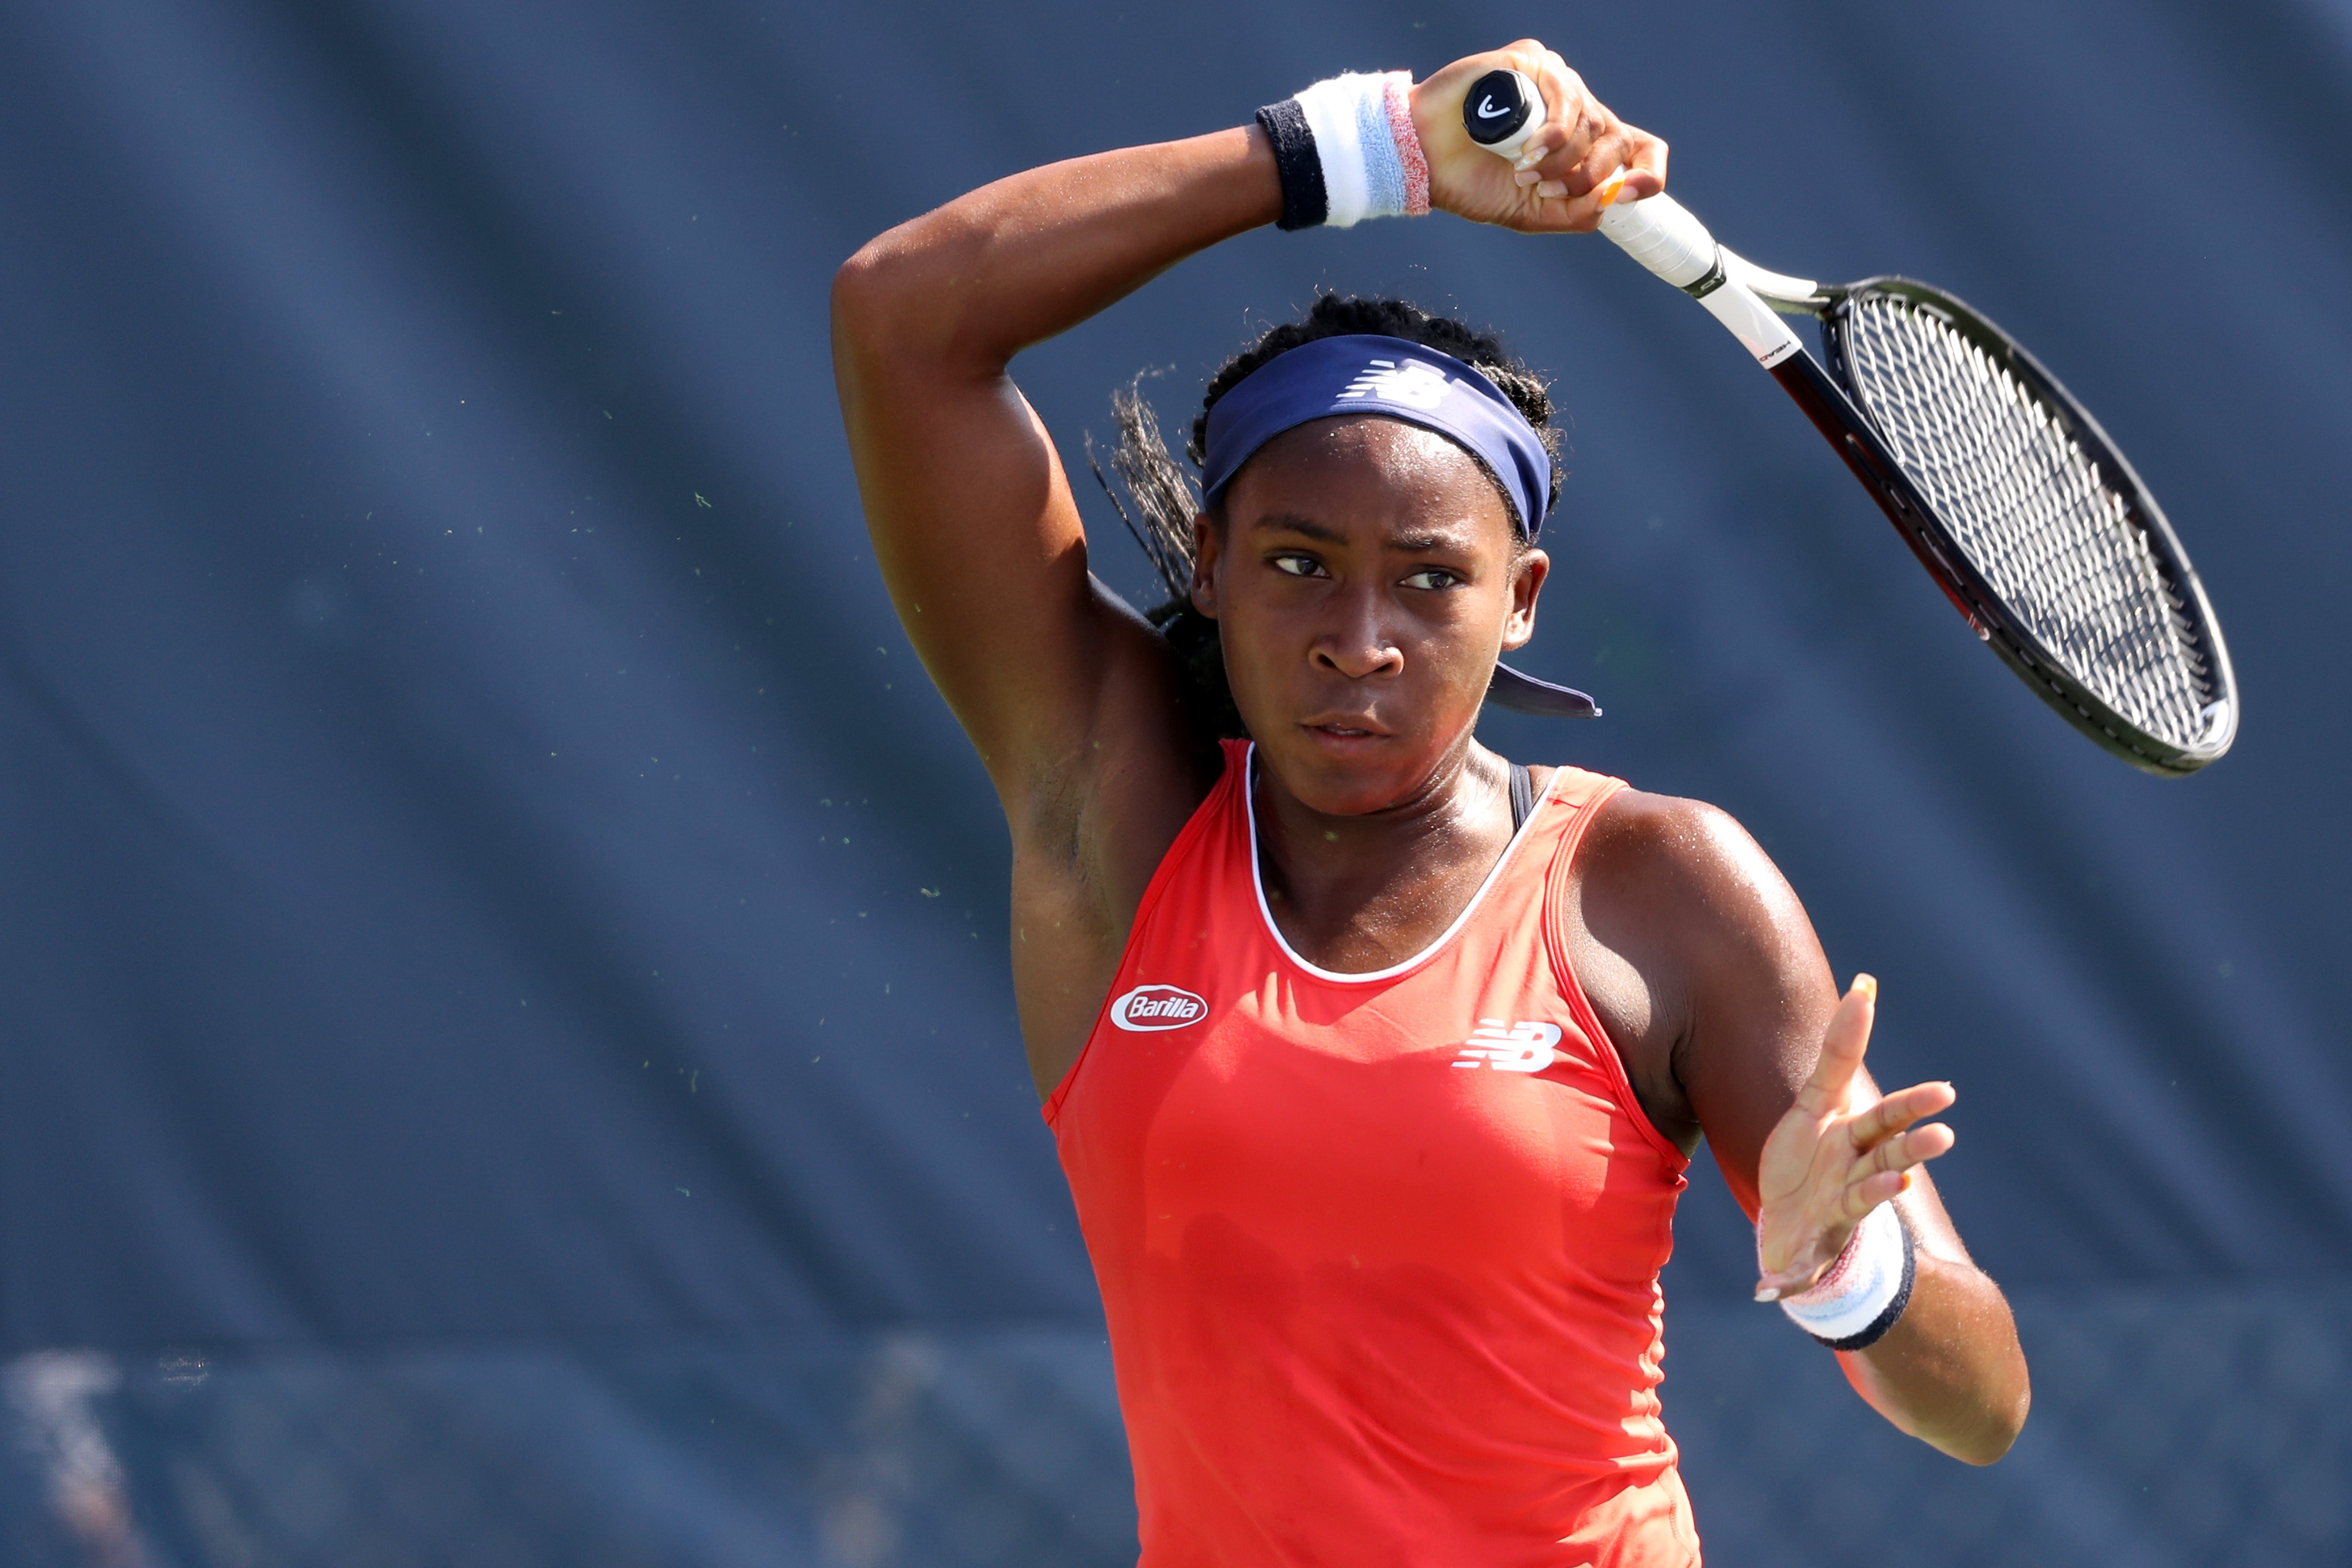 15-Year-Old Cori Gauff Given Wild Card Entry To U.S. Open